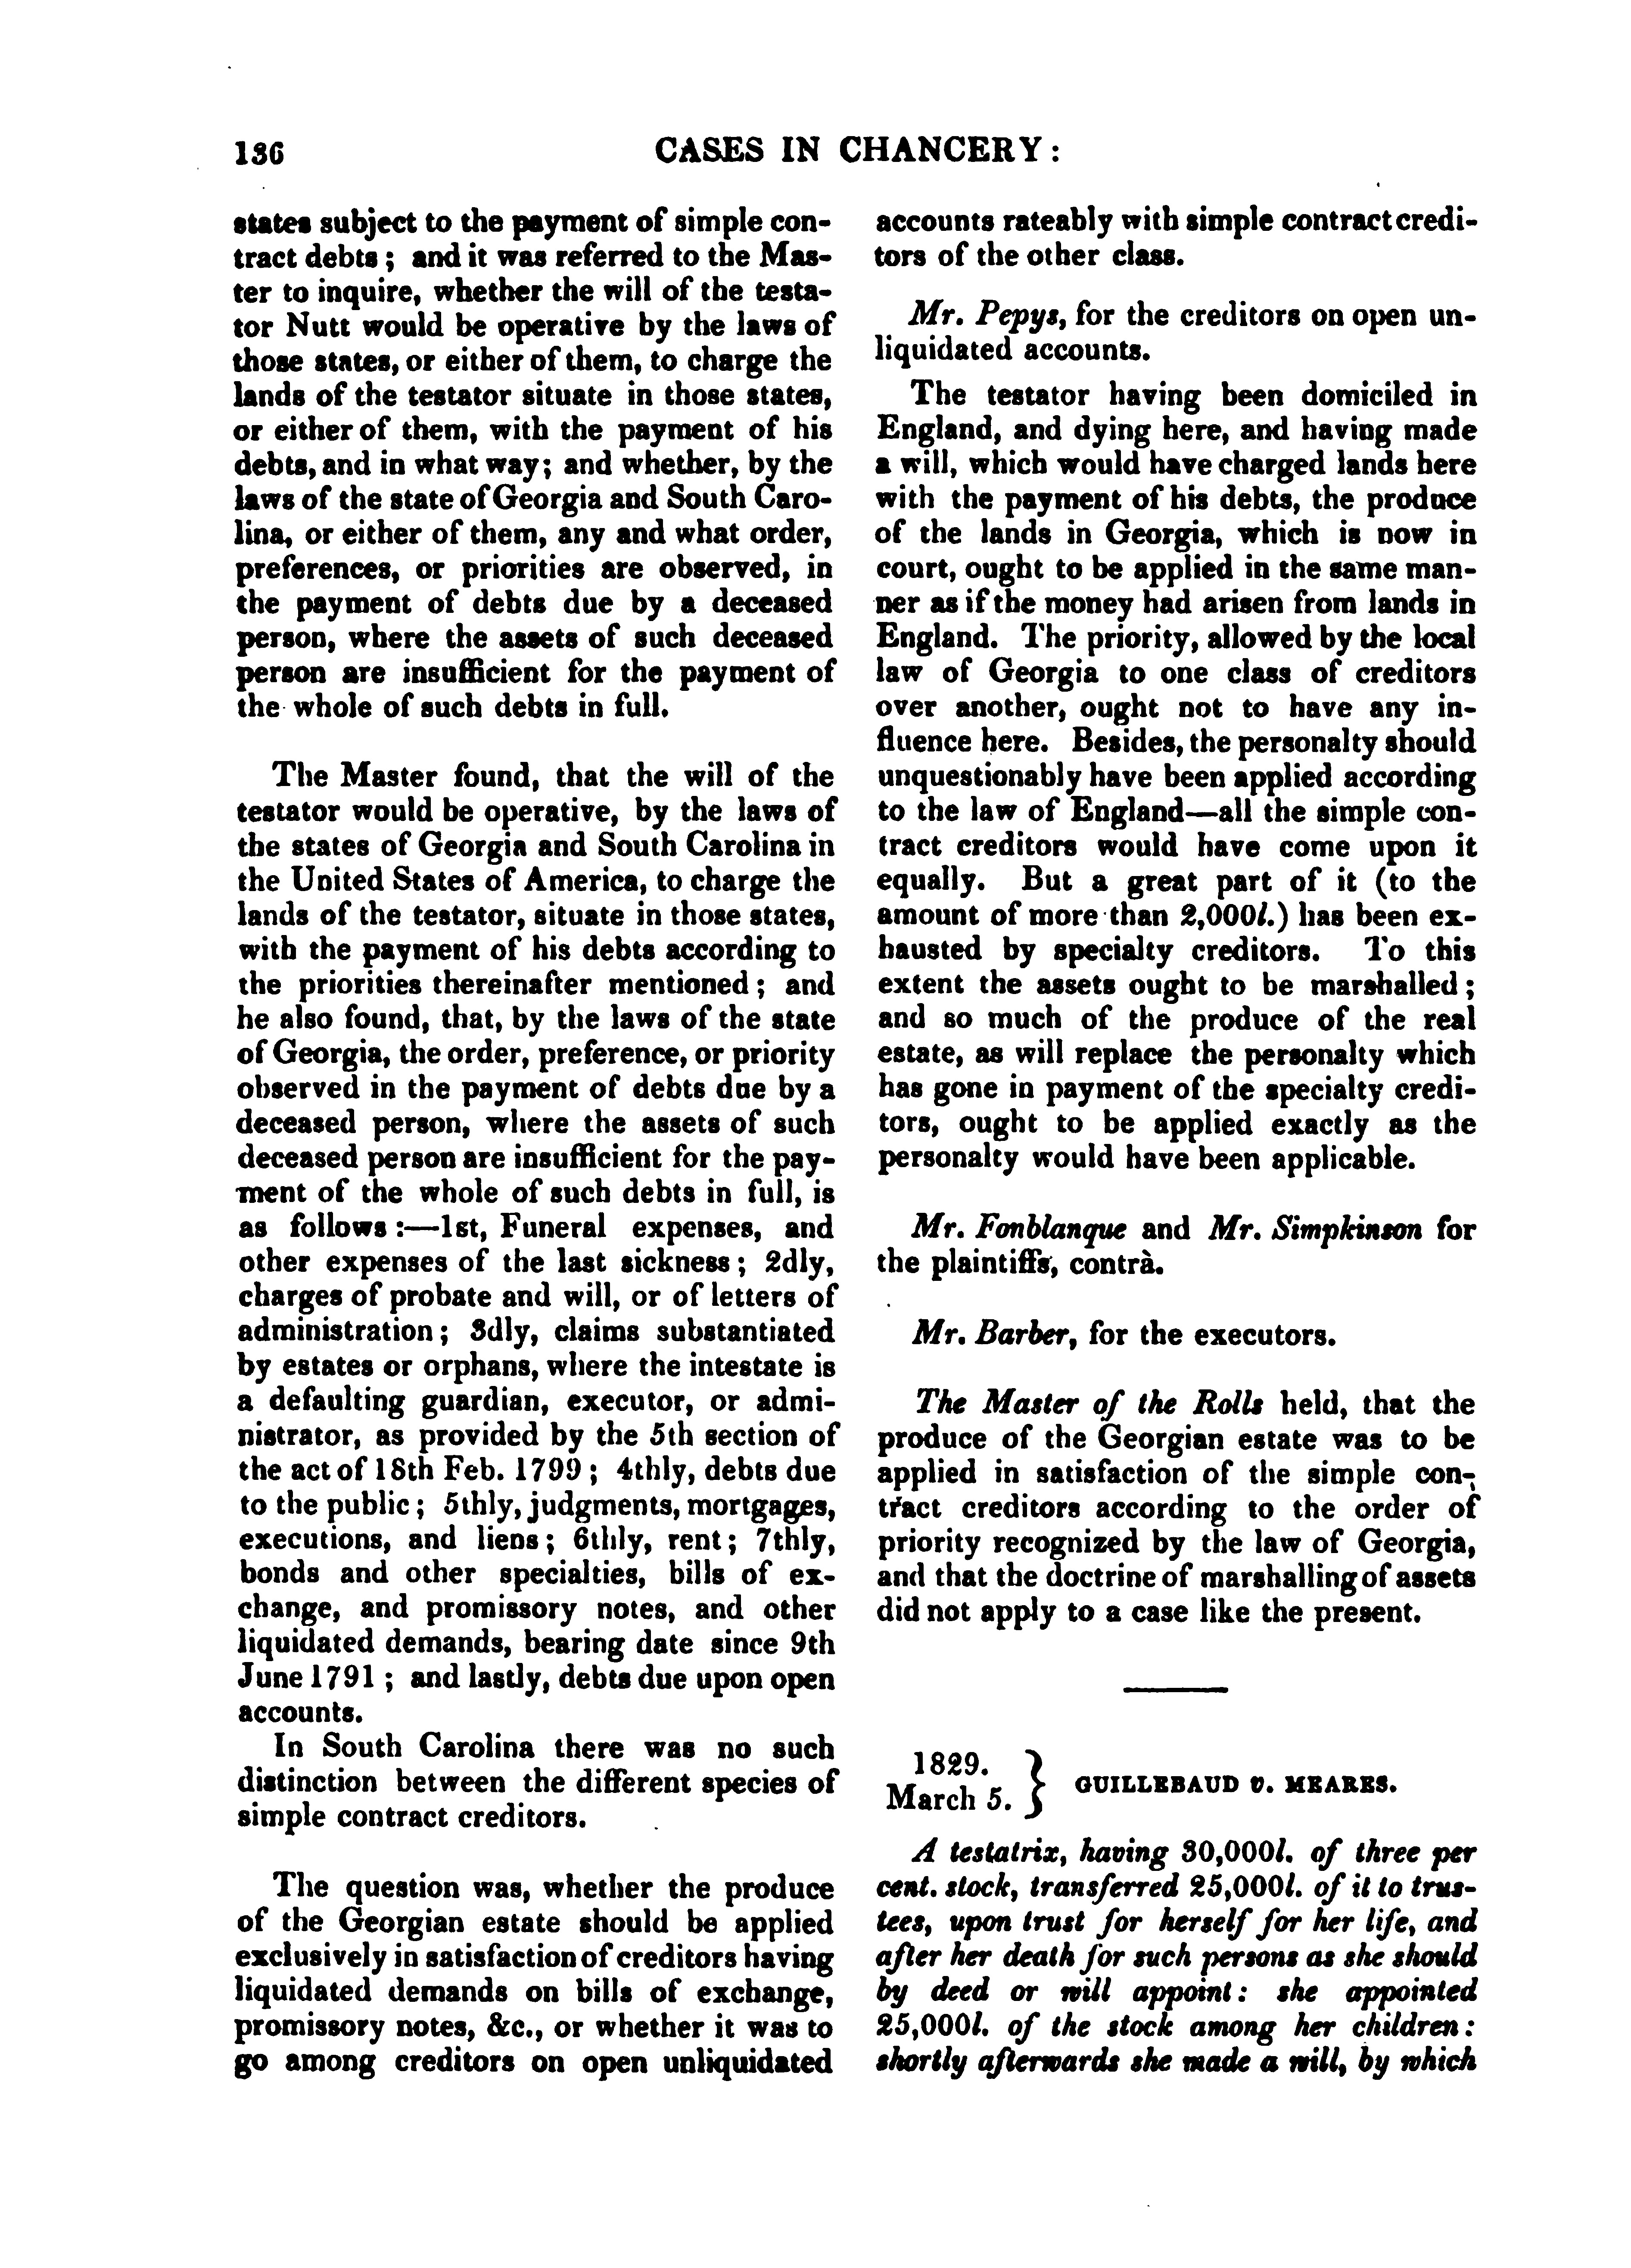 Guillebaud vs. Meares 1829 (p1) - Google books, Comprising Reports of Cases in the Courts of Chancery... vol 7.